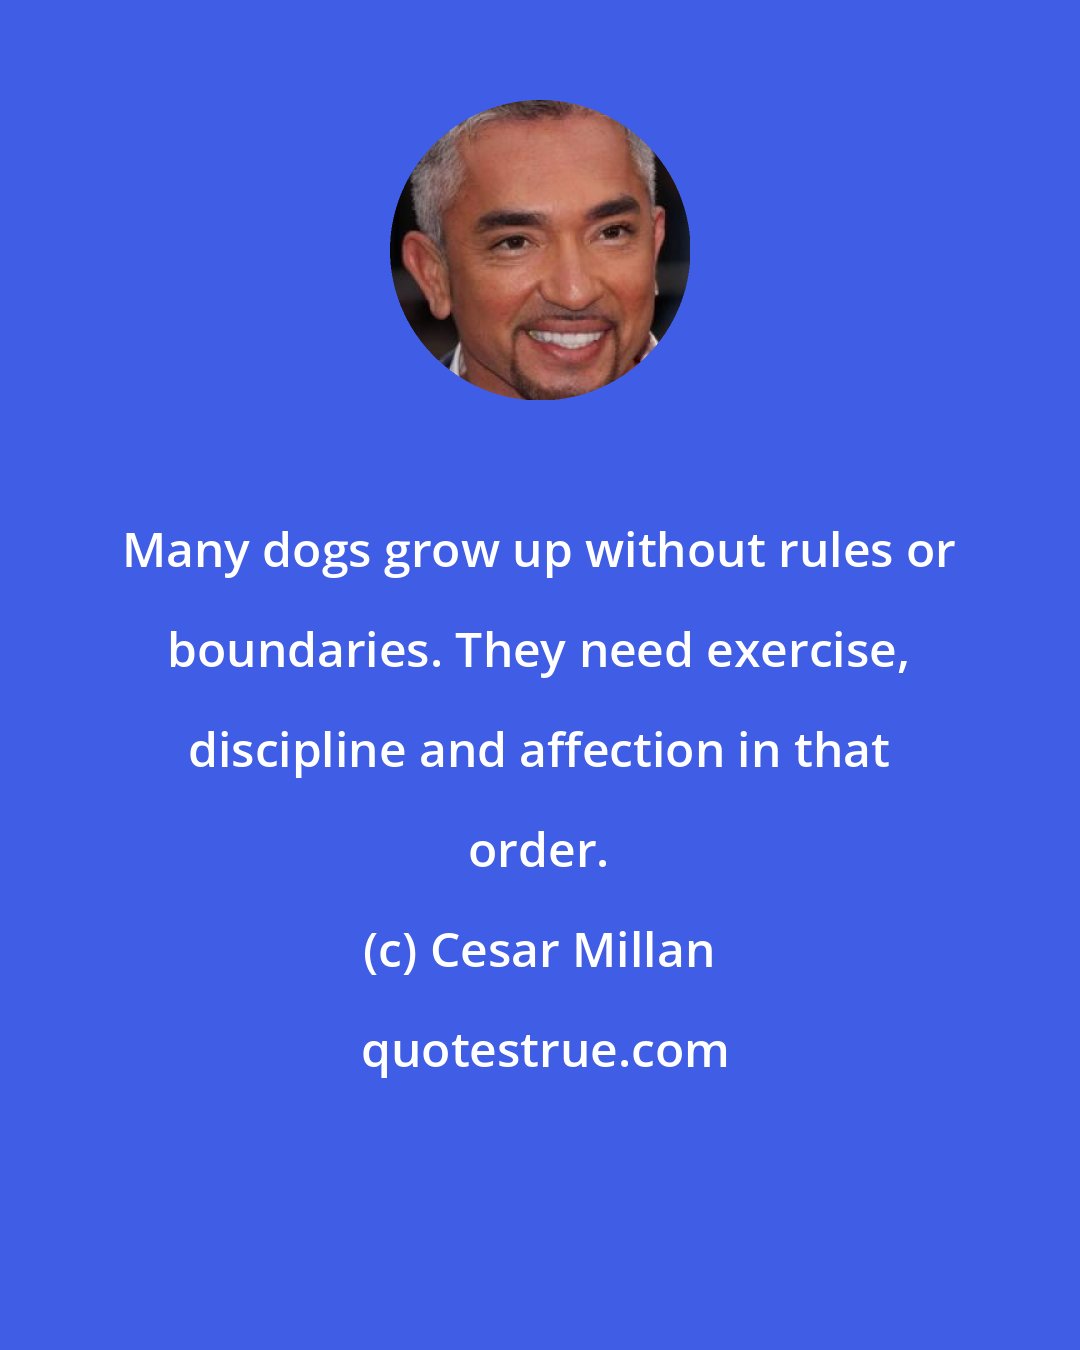 Cesar Millan: Many dogs grow up without rules or boundaries. They need exercise, discipline and affection in that order.